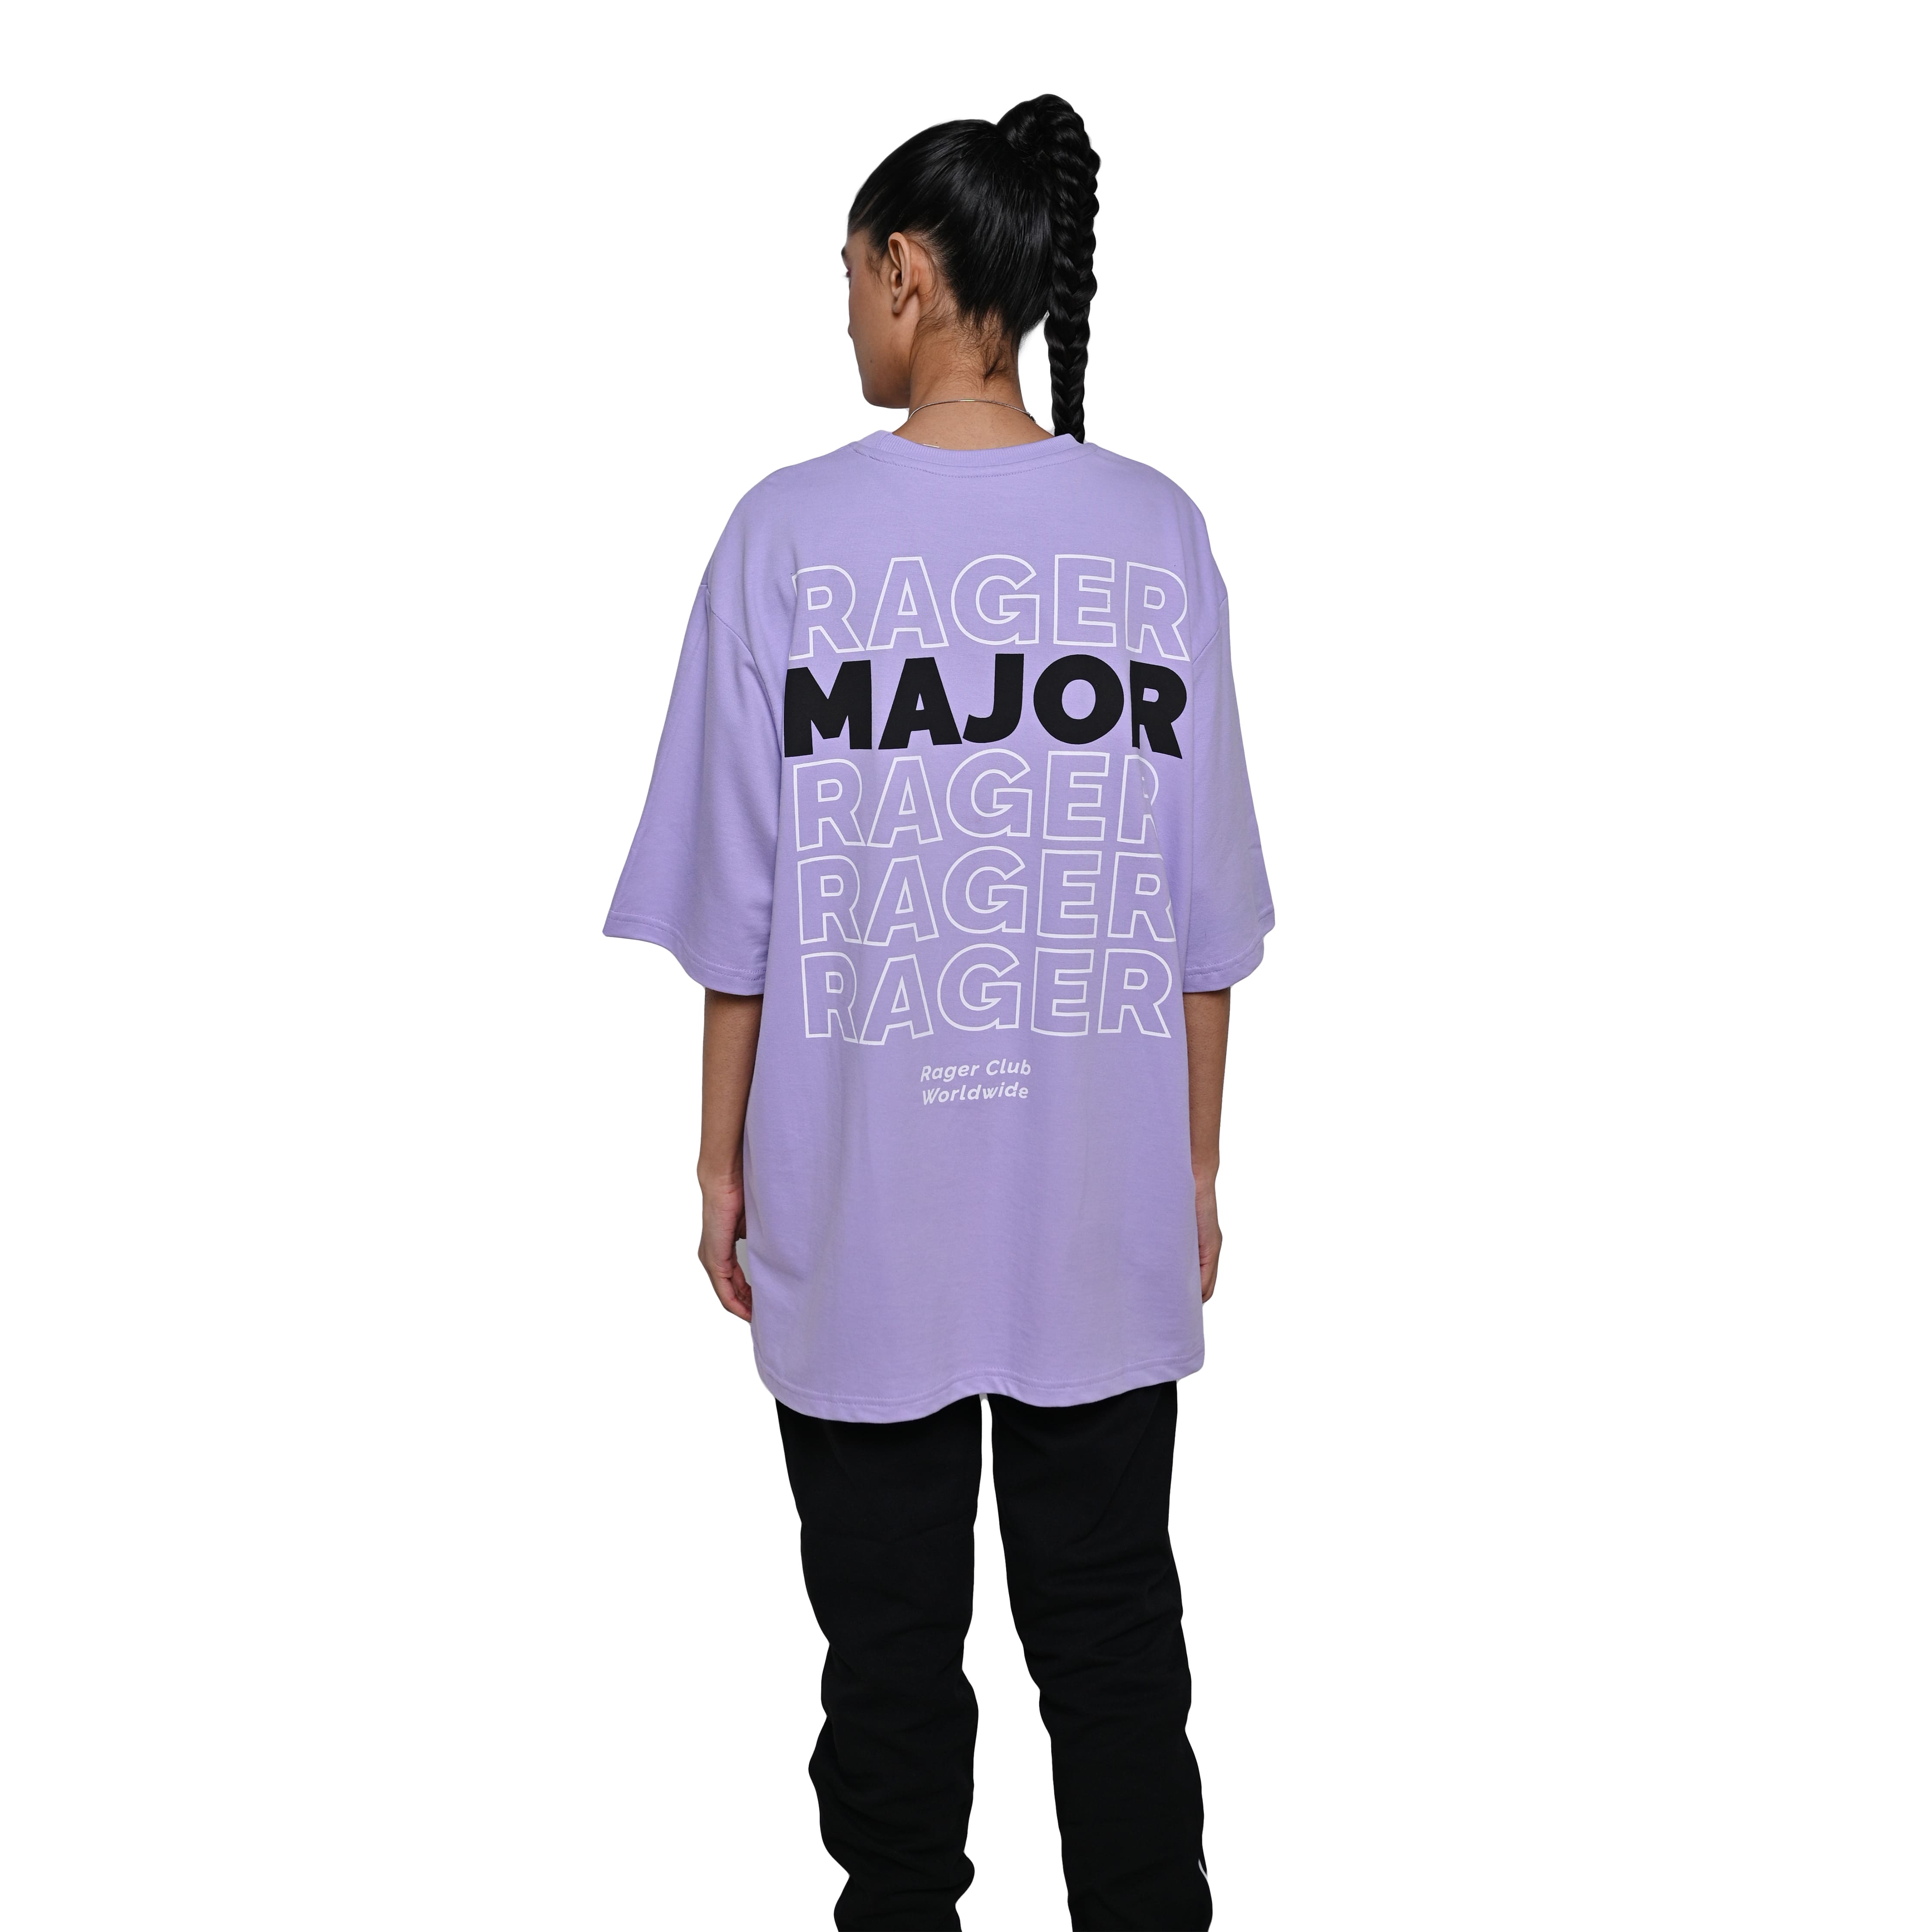 Major rager T-Shirt: Lavender, Oversized, Back Model Pose, Bio-Washed Cotton Printed by Techno Be With You